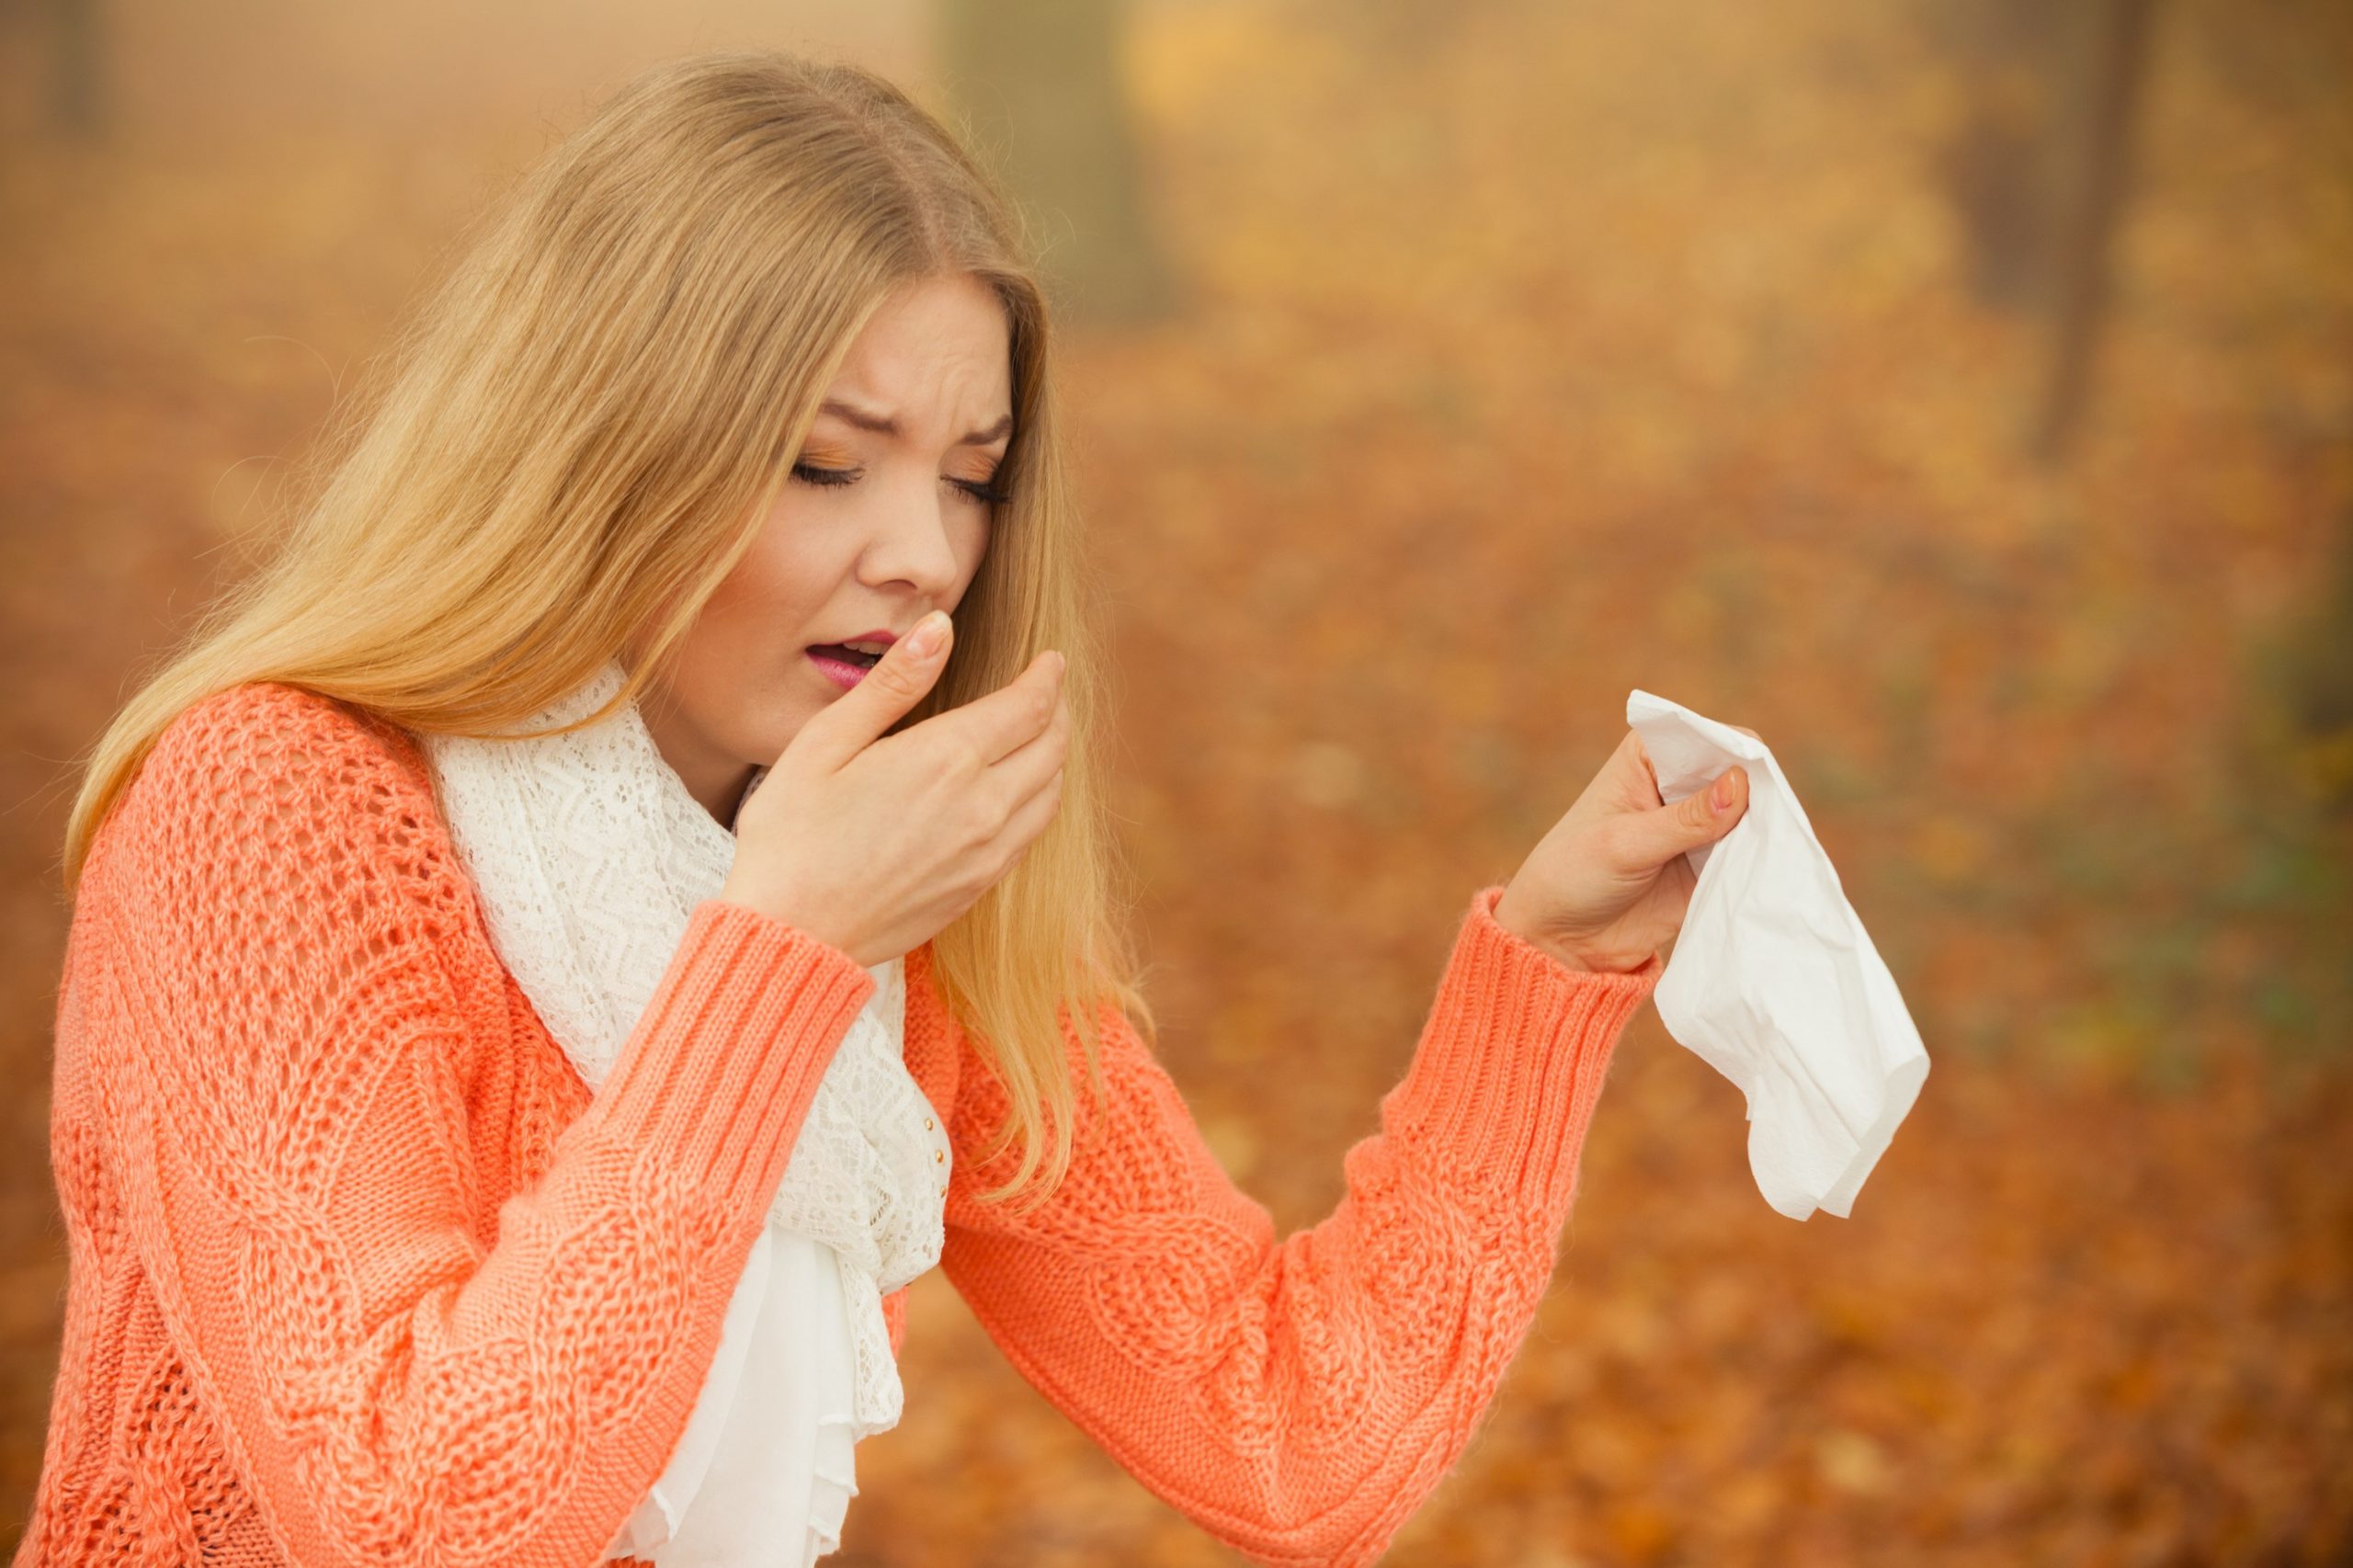 Fall allergies